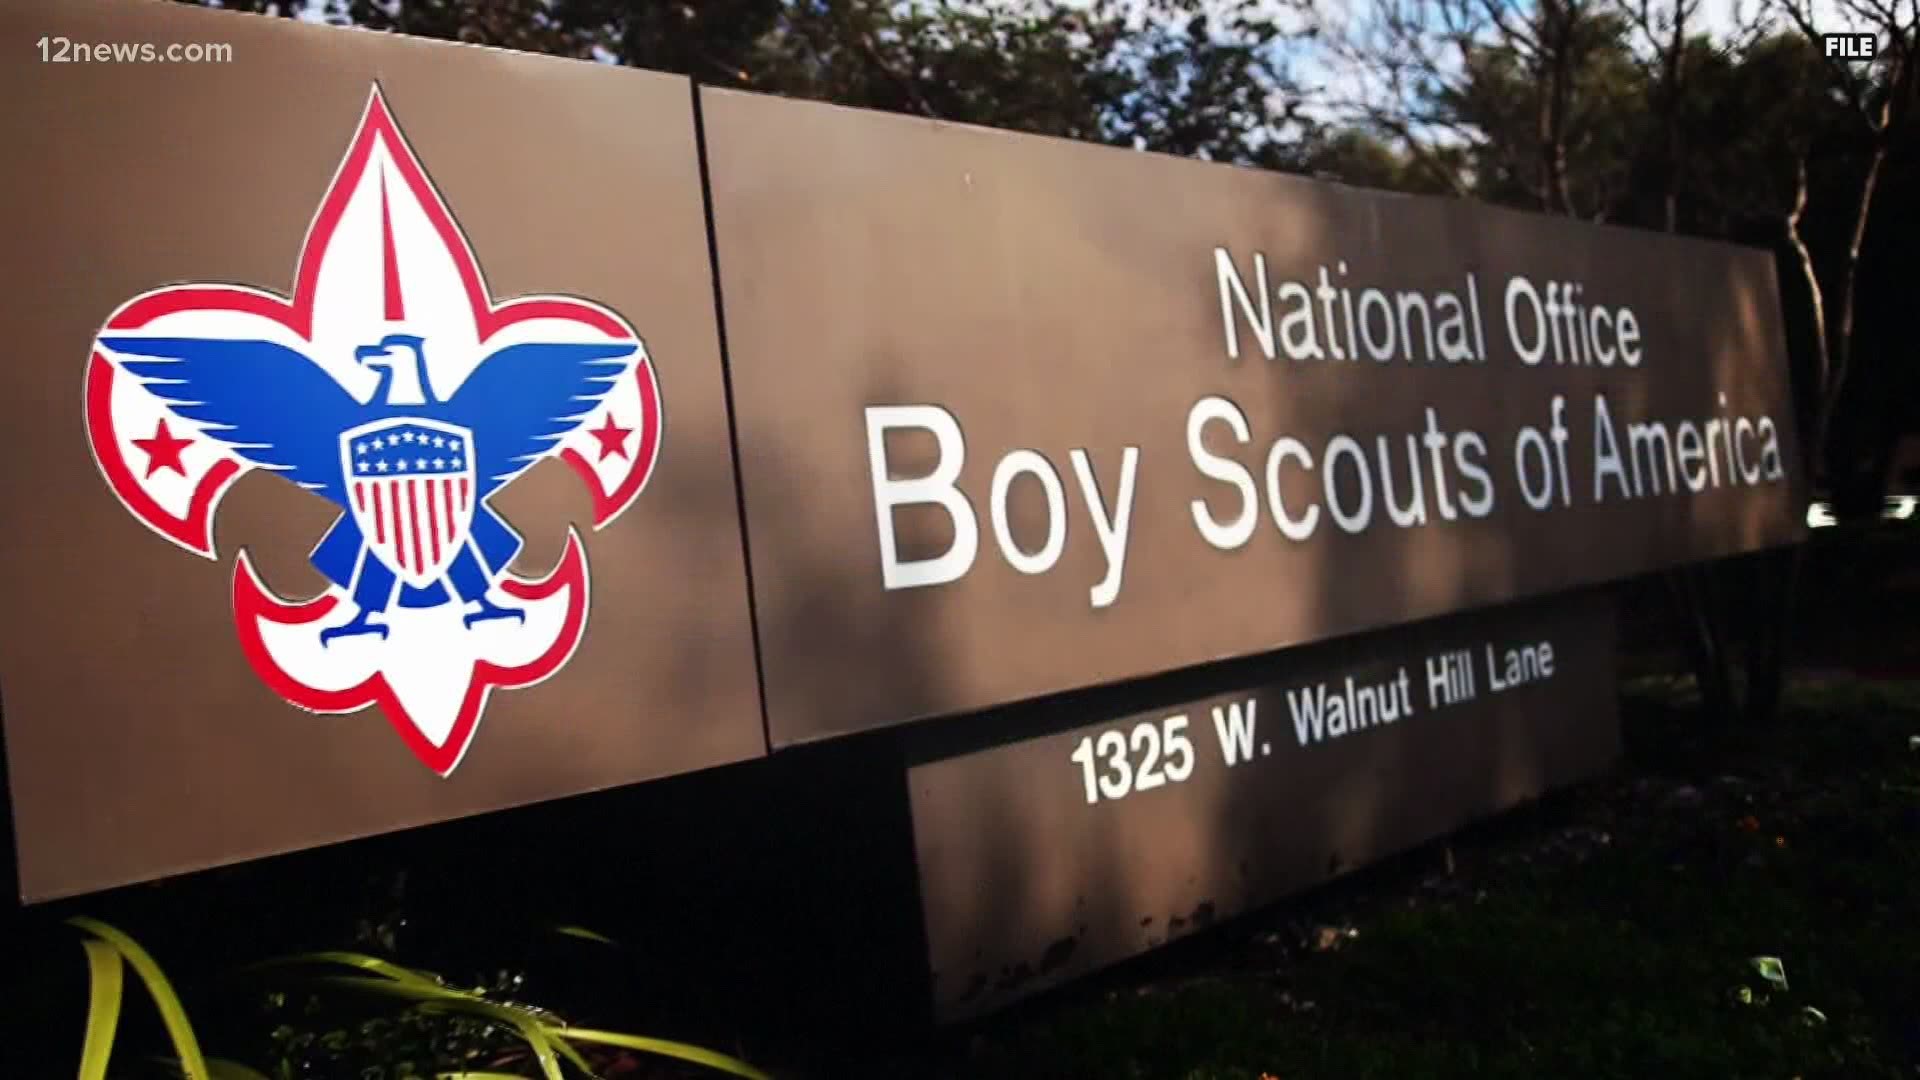 Seven lawsuits have been filed against the Mormon church for what victims claim is a failure to keep young Boy Scouts safe.